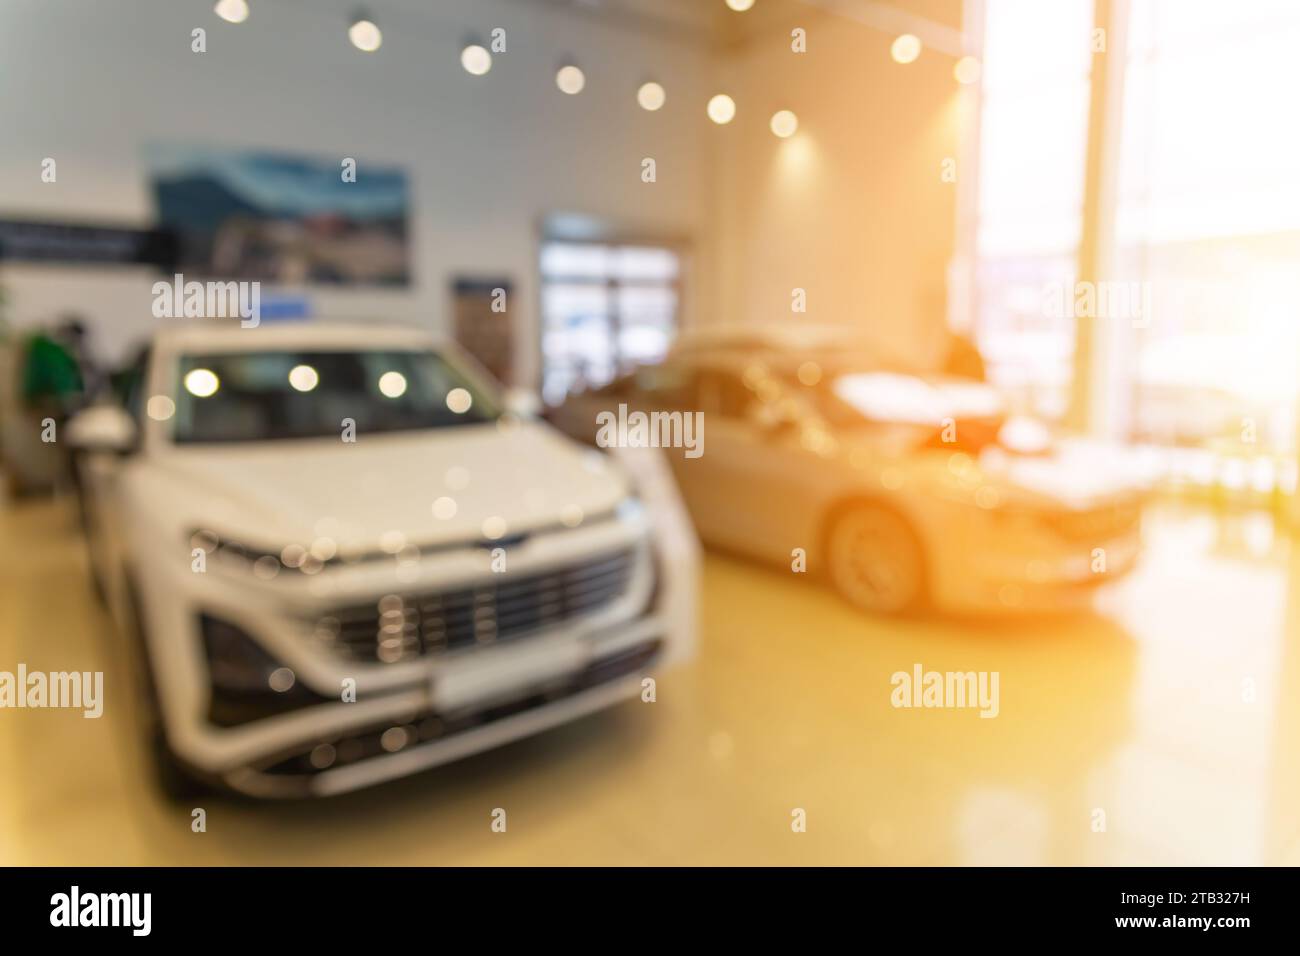 Blurred new car parked in modern showroom waiting for sales. Abstract background of blurred new cars dealership place. Stock Photo